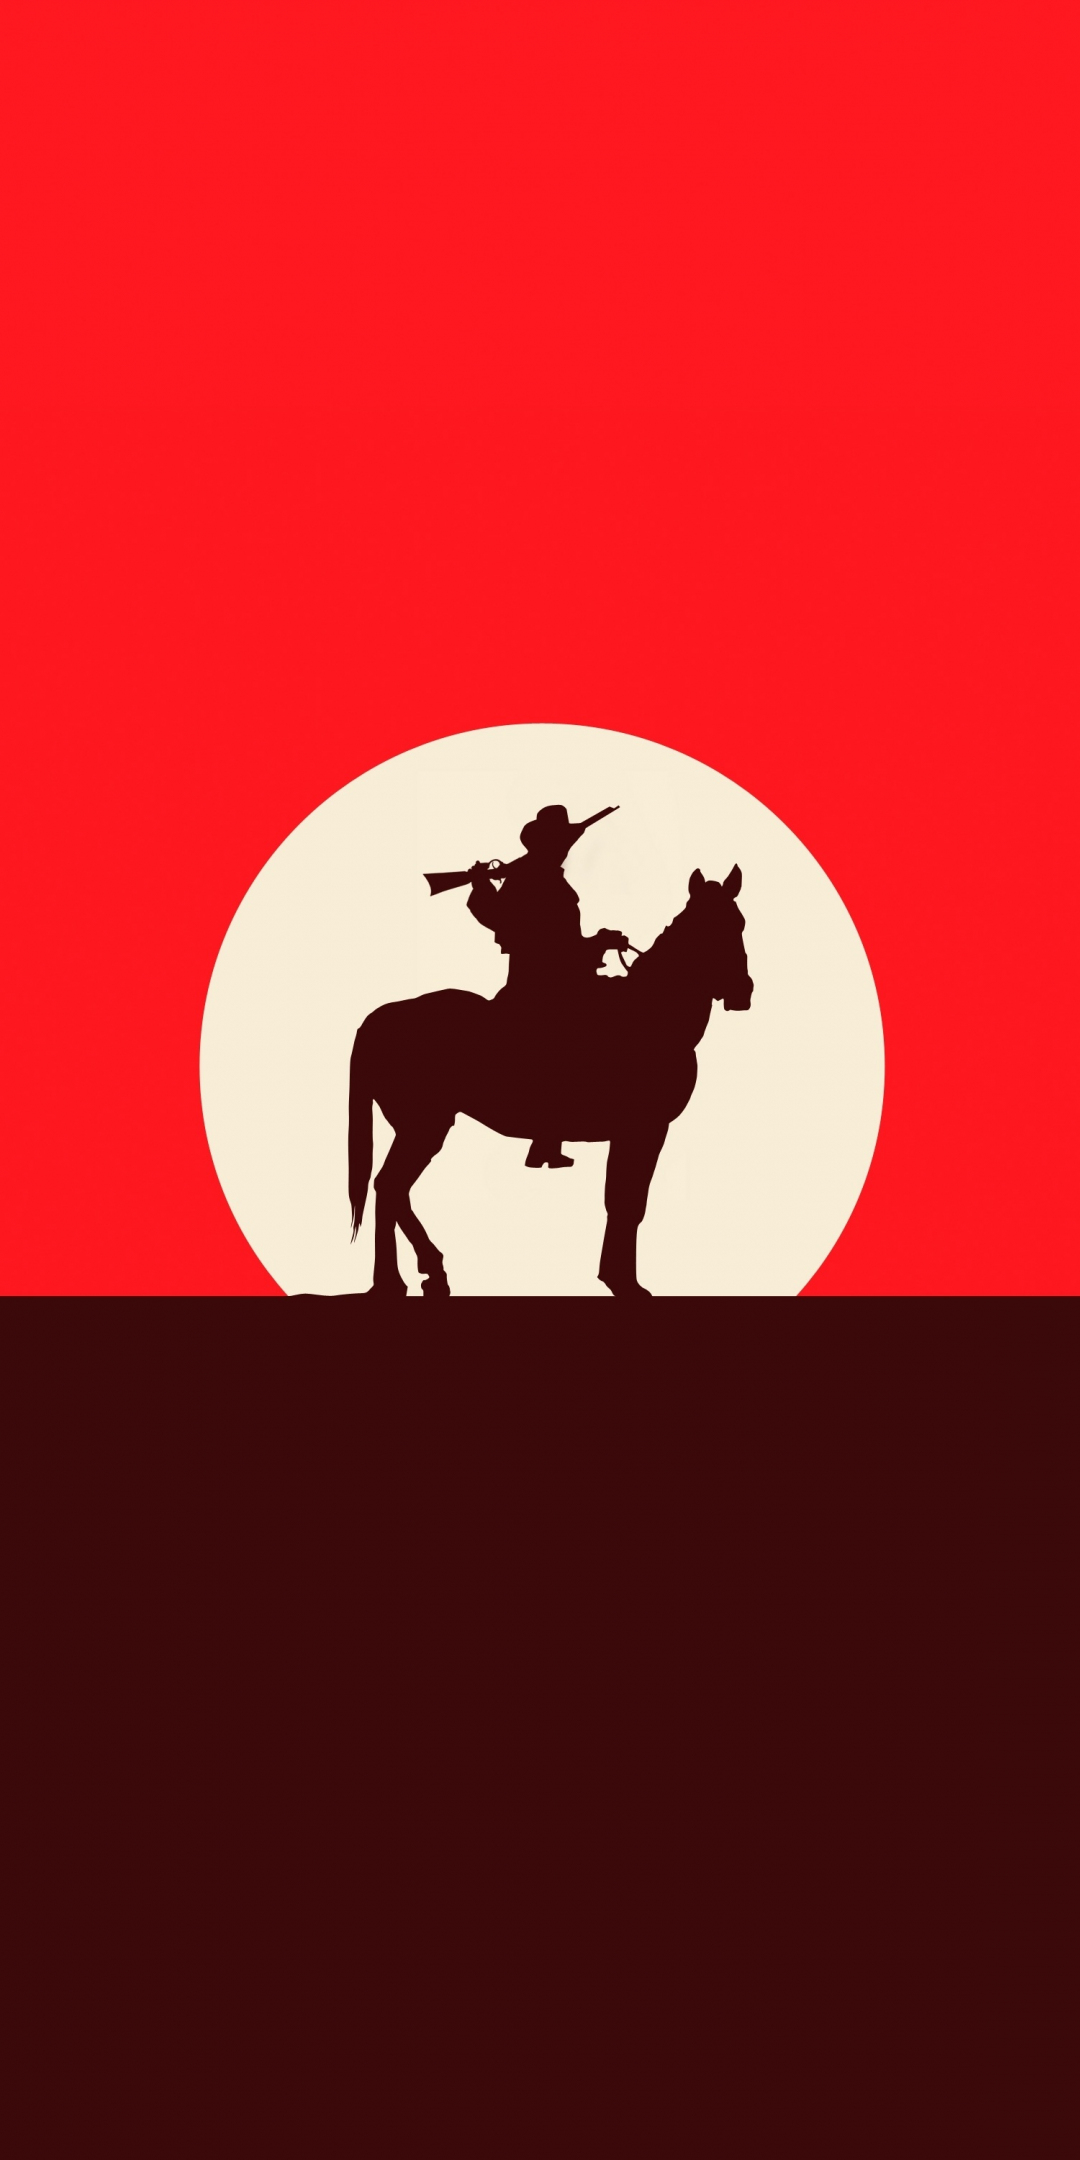 Red Dead Redemption 2, sunset, silhouette, 2018 game, cowboy, 1080x2160 wallpaper